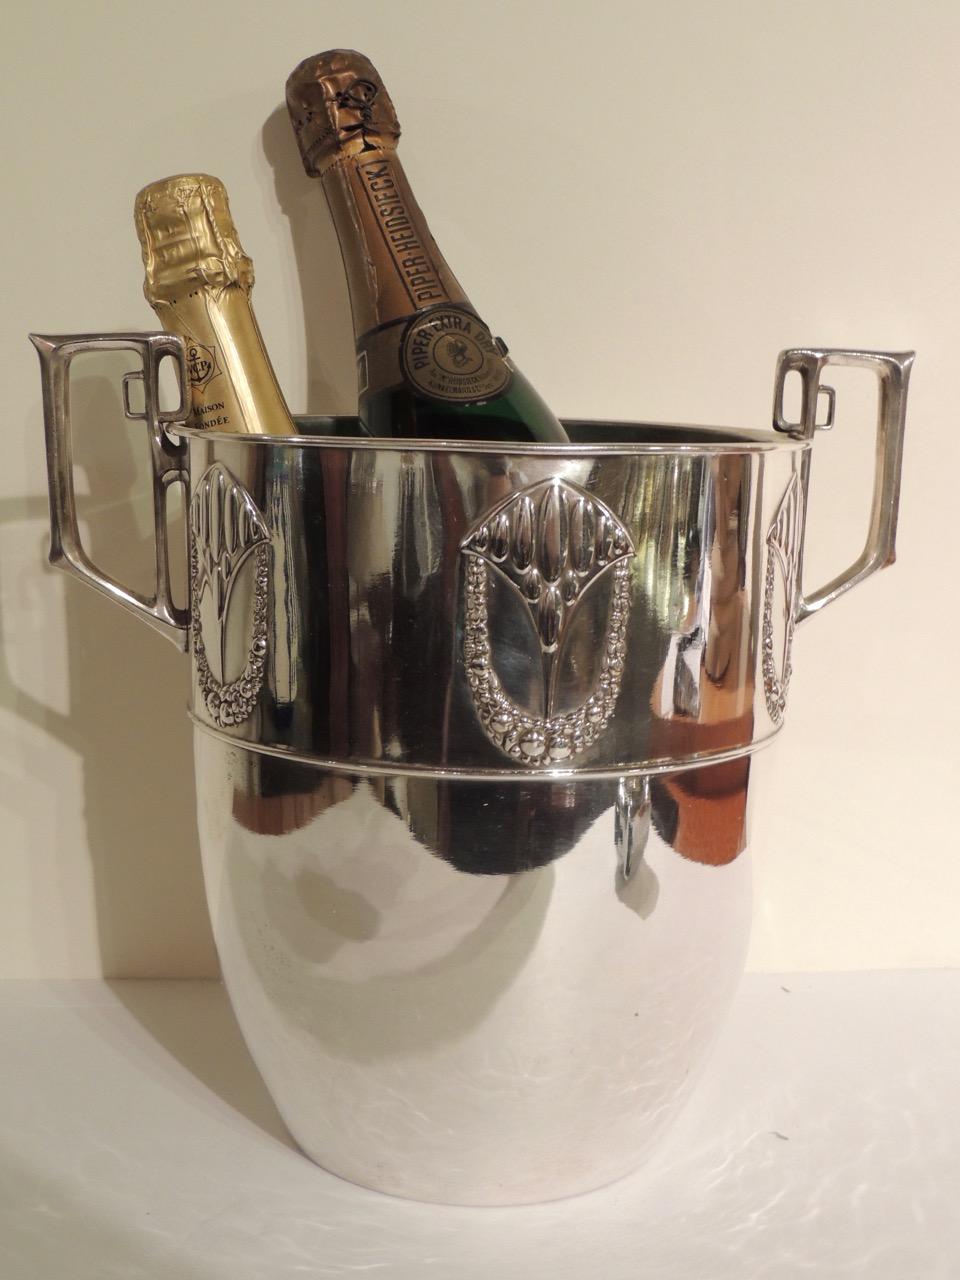 A 1920s sliver champagne cooler with lovely “repousse” embellishment of a cascading wreath of flowers. The handles have a geometric “Jugendstil” design. Repousse is a technique in which there is an embossed design, pressed or hammered into relief